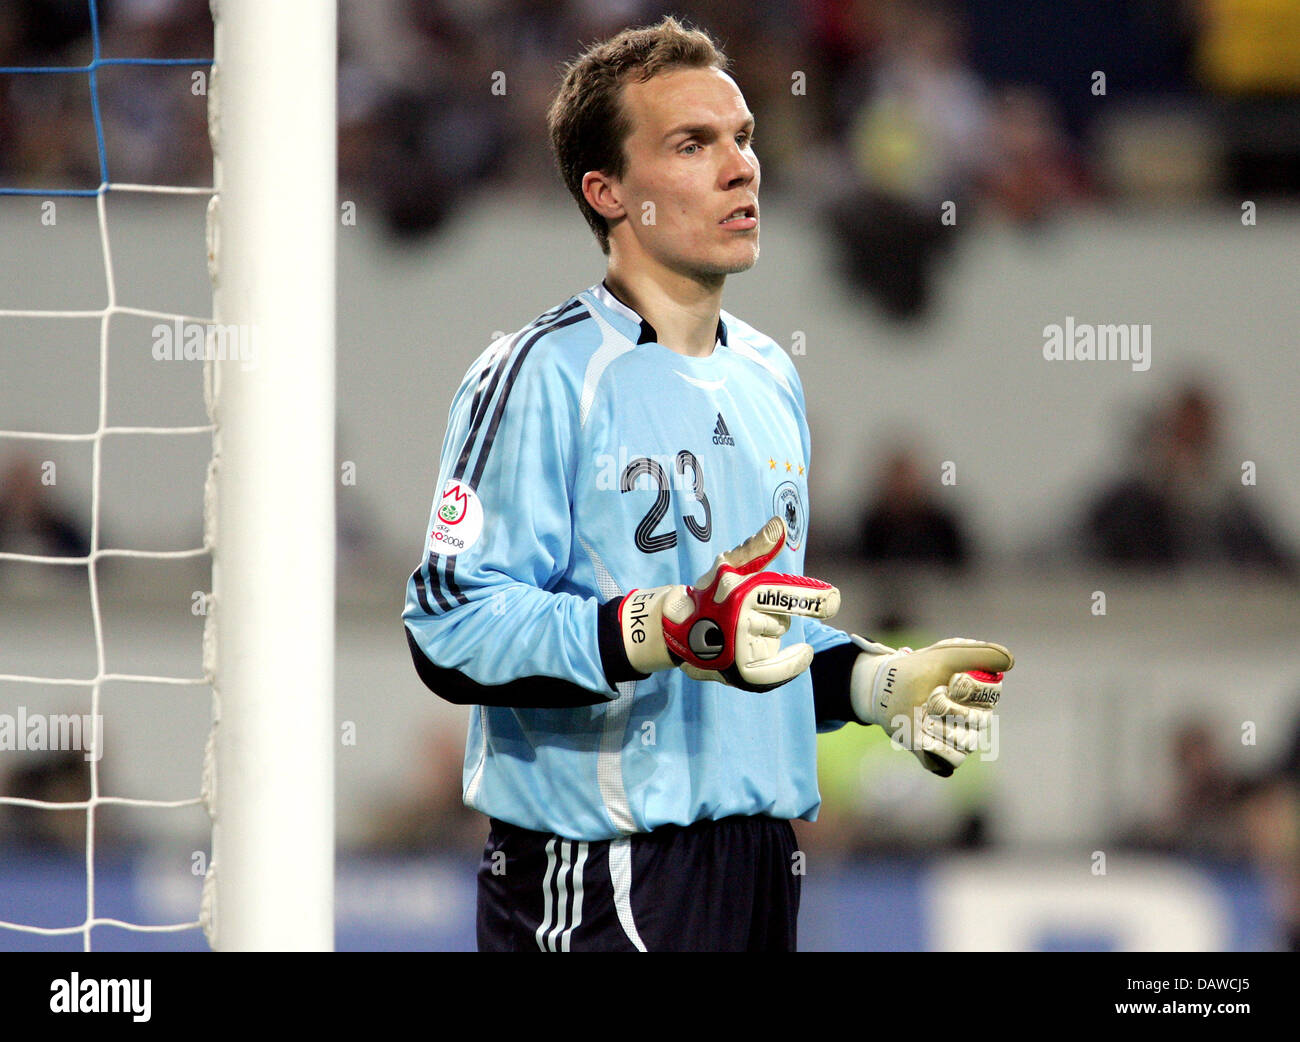 German national team goalkeeper Robert Enke is pictured during the international friendly against Denmark at the MSV-Arena stadium in Duisburg, Germany, Wednesday, 28 March 2007. Photo: Rolf Vennenbernd Stock Photo